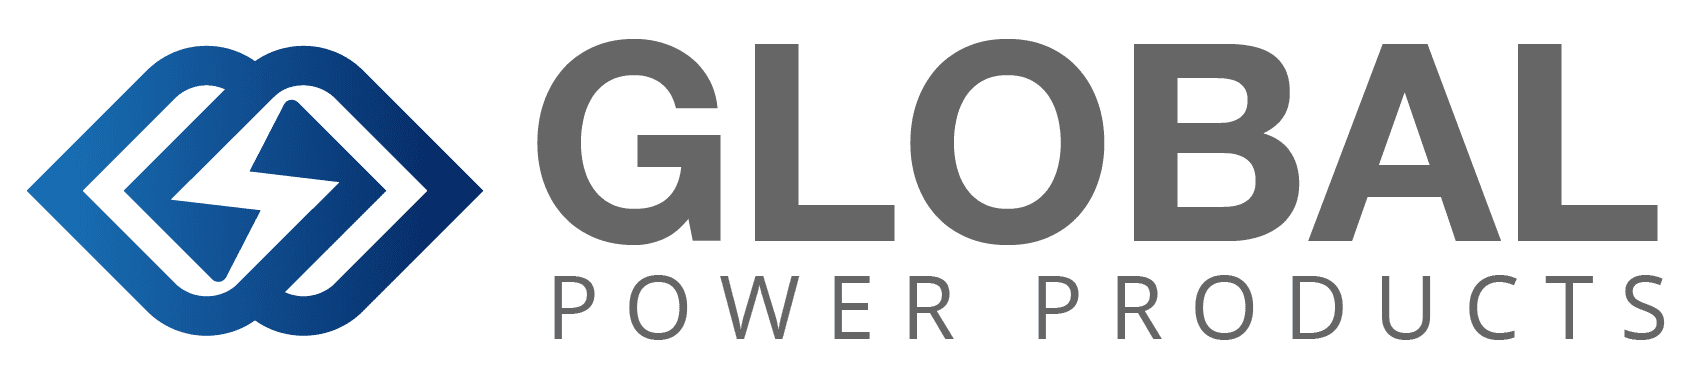 Global Power Products logo - color